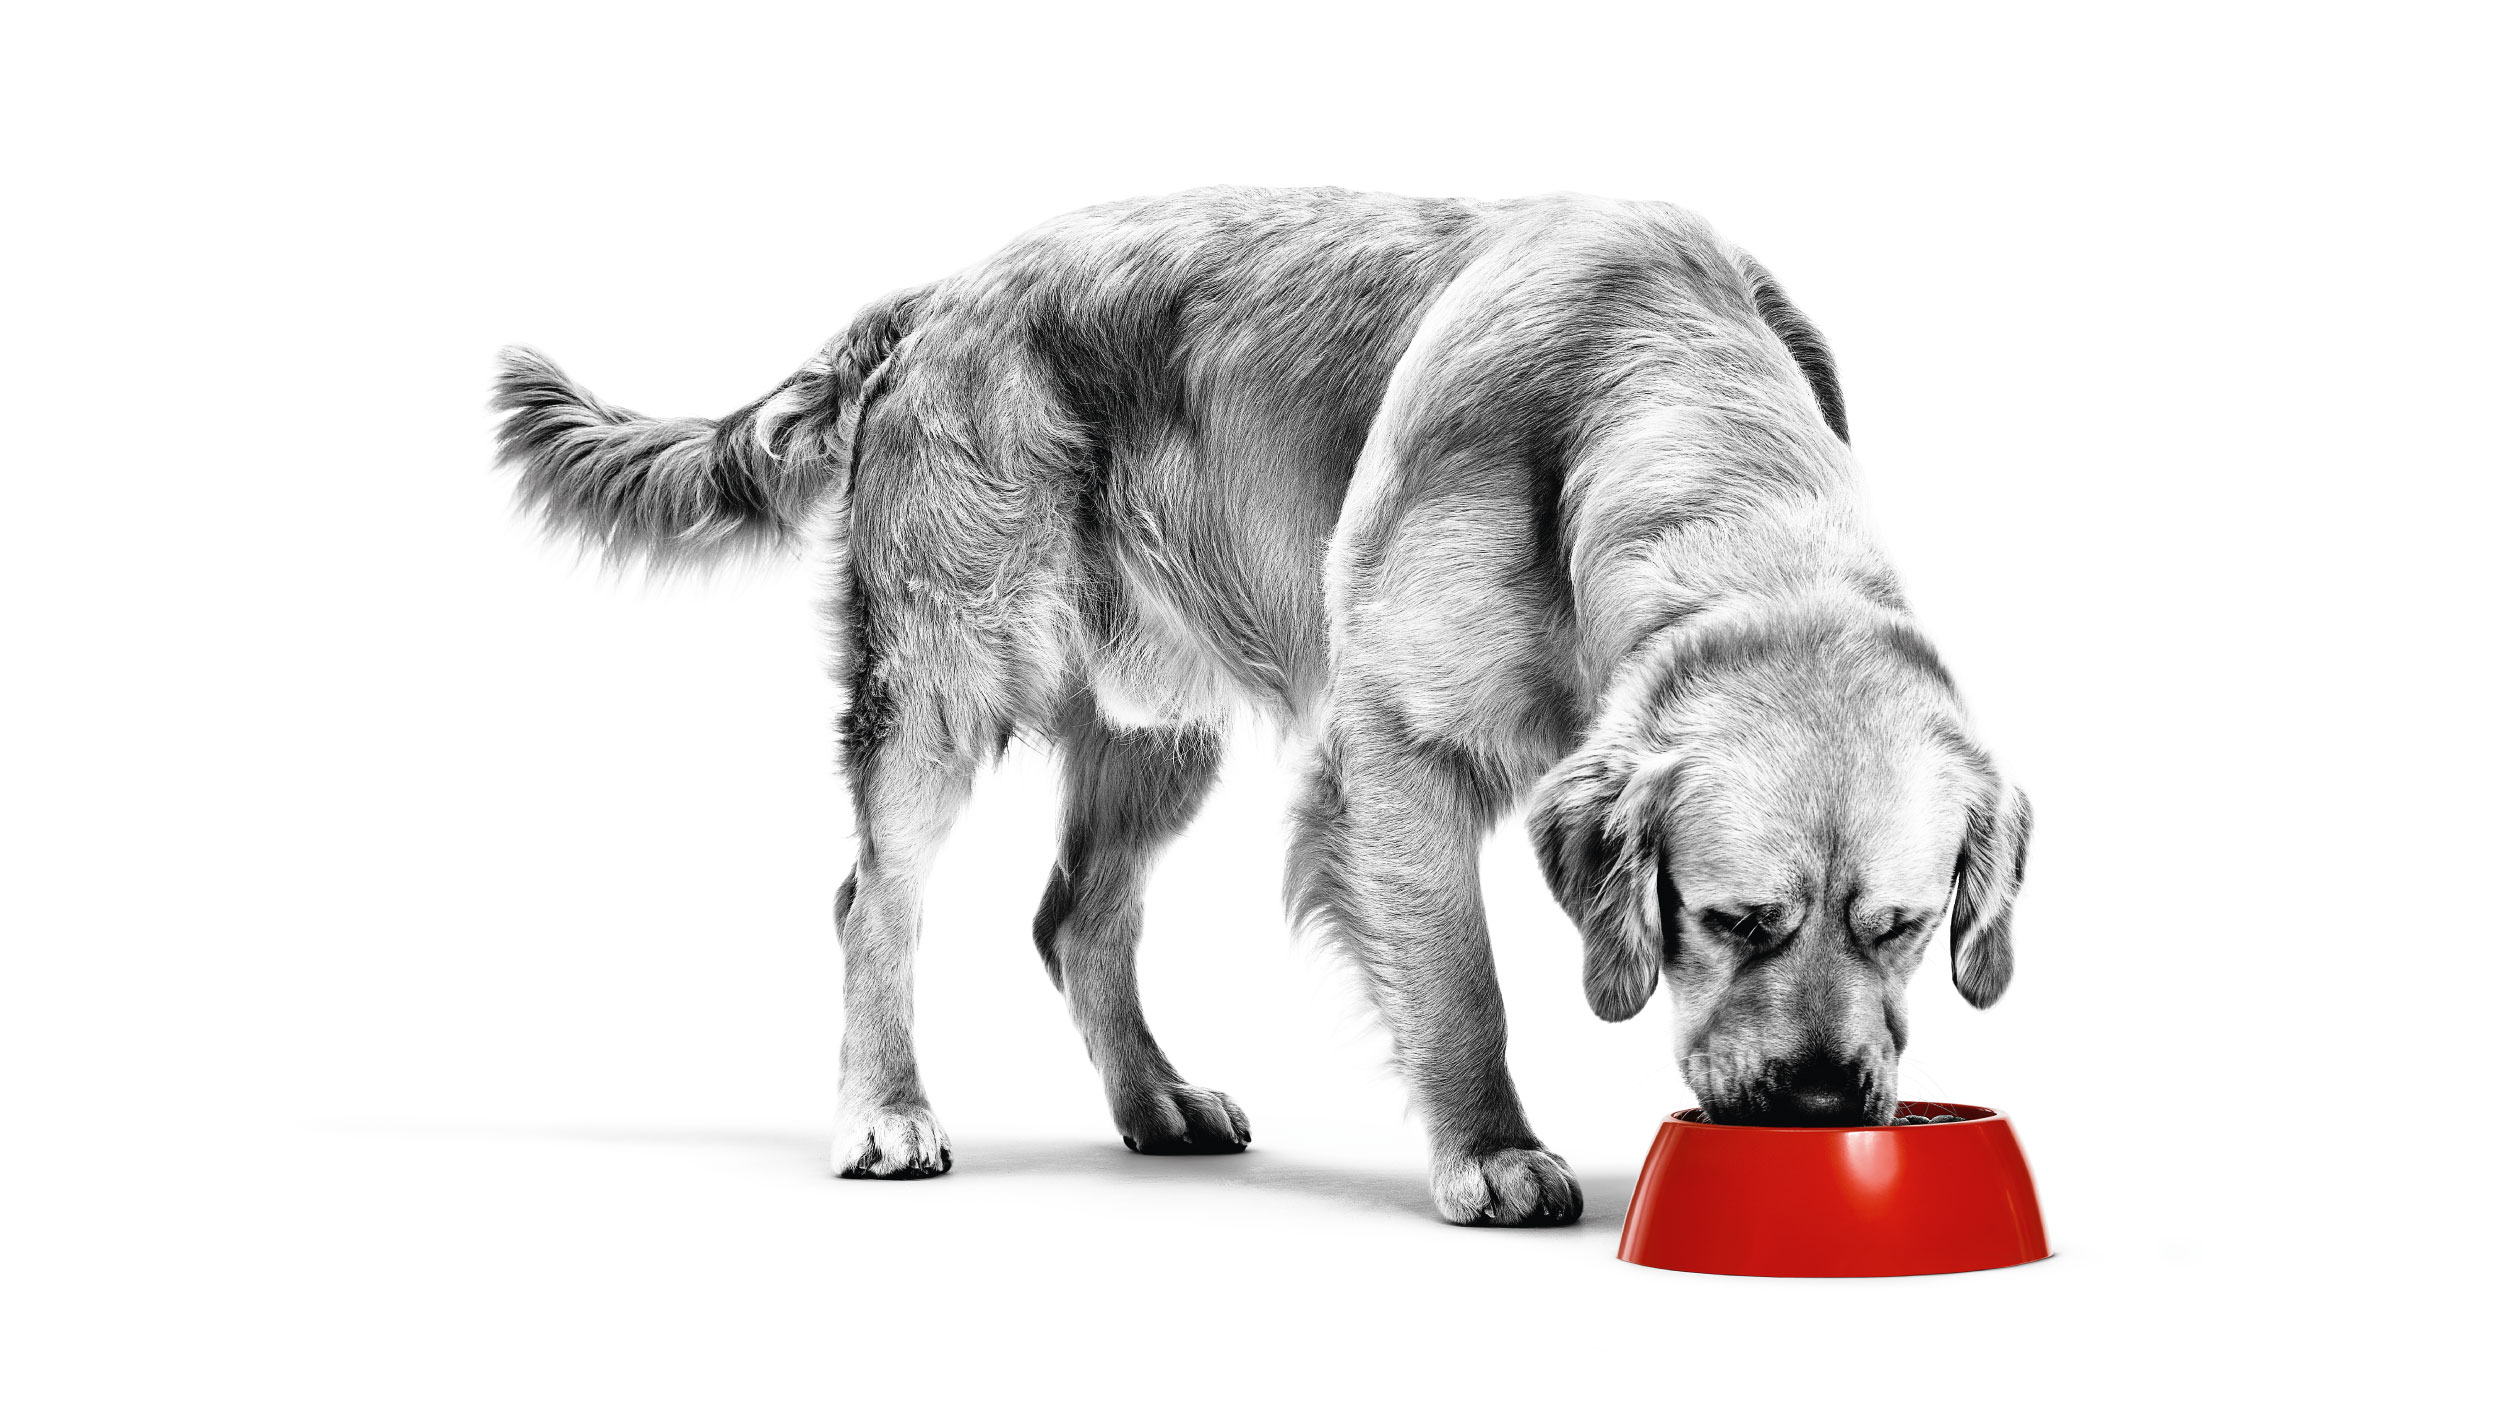 Black and white Golden Retriever eating from red bowl